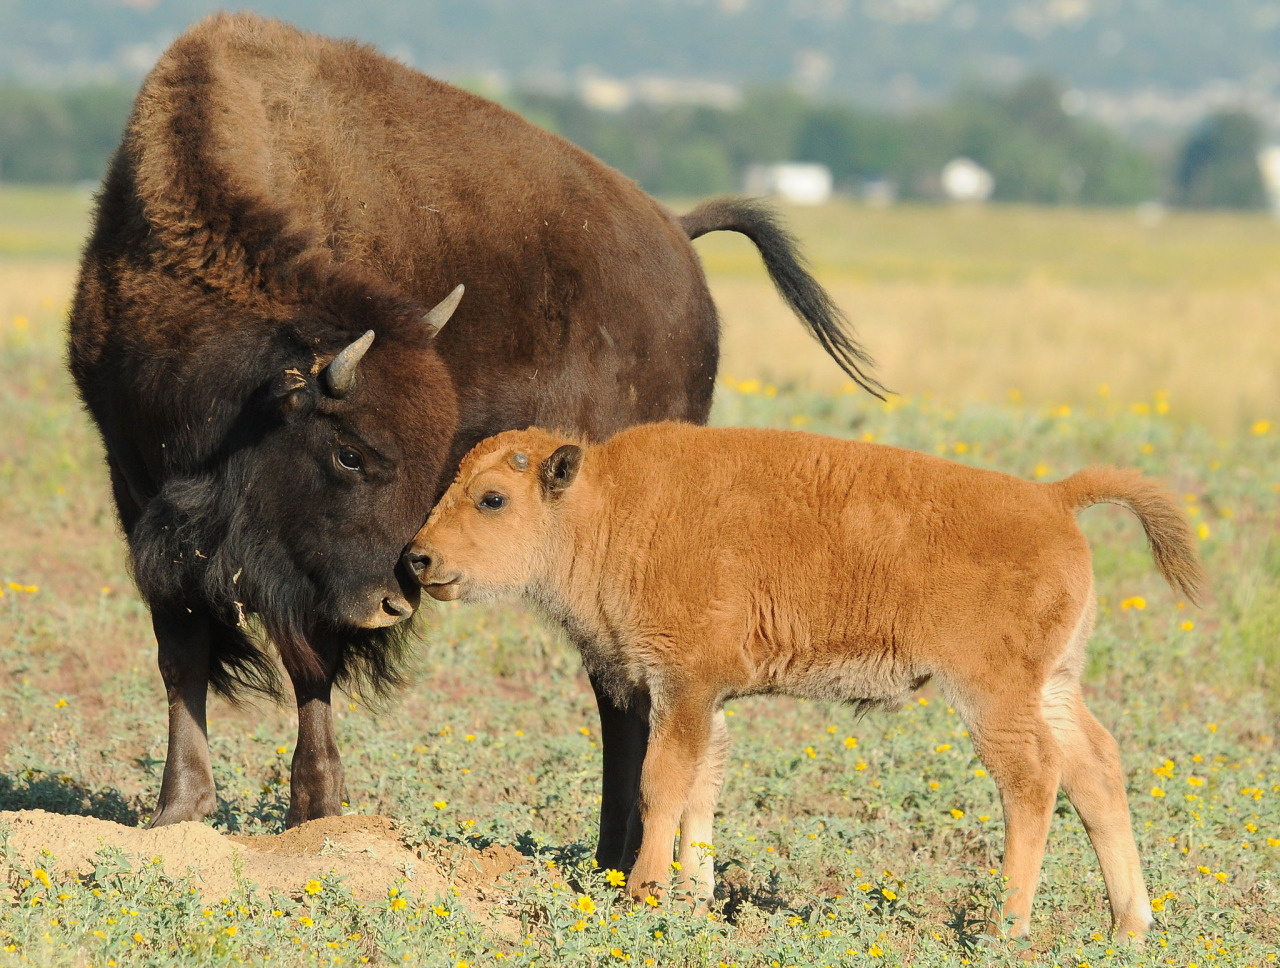 A bison and calf at Rocky Mountain Aresenal National Wildlife Refuge in Colorado